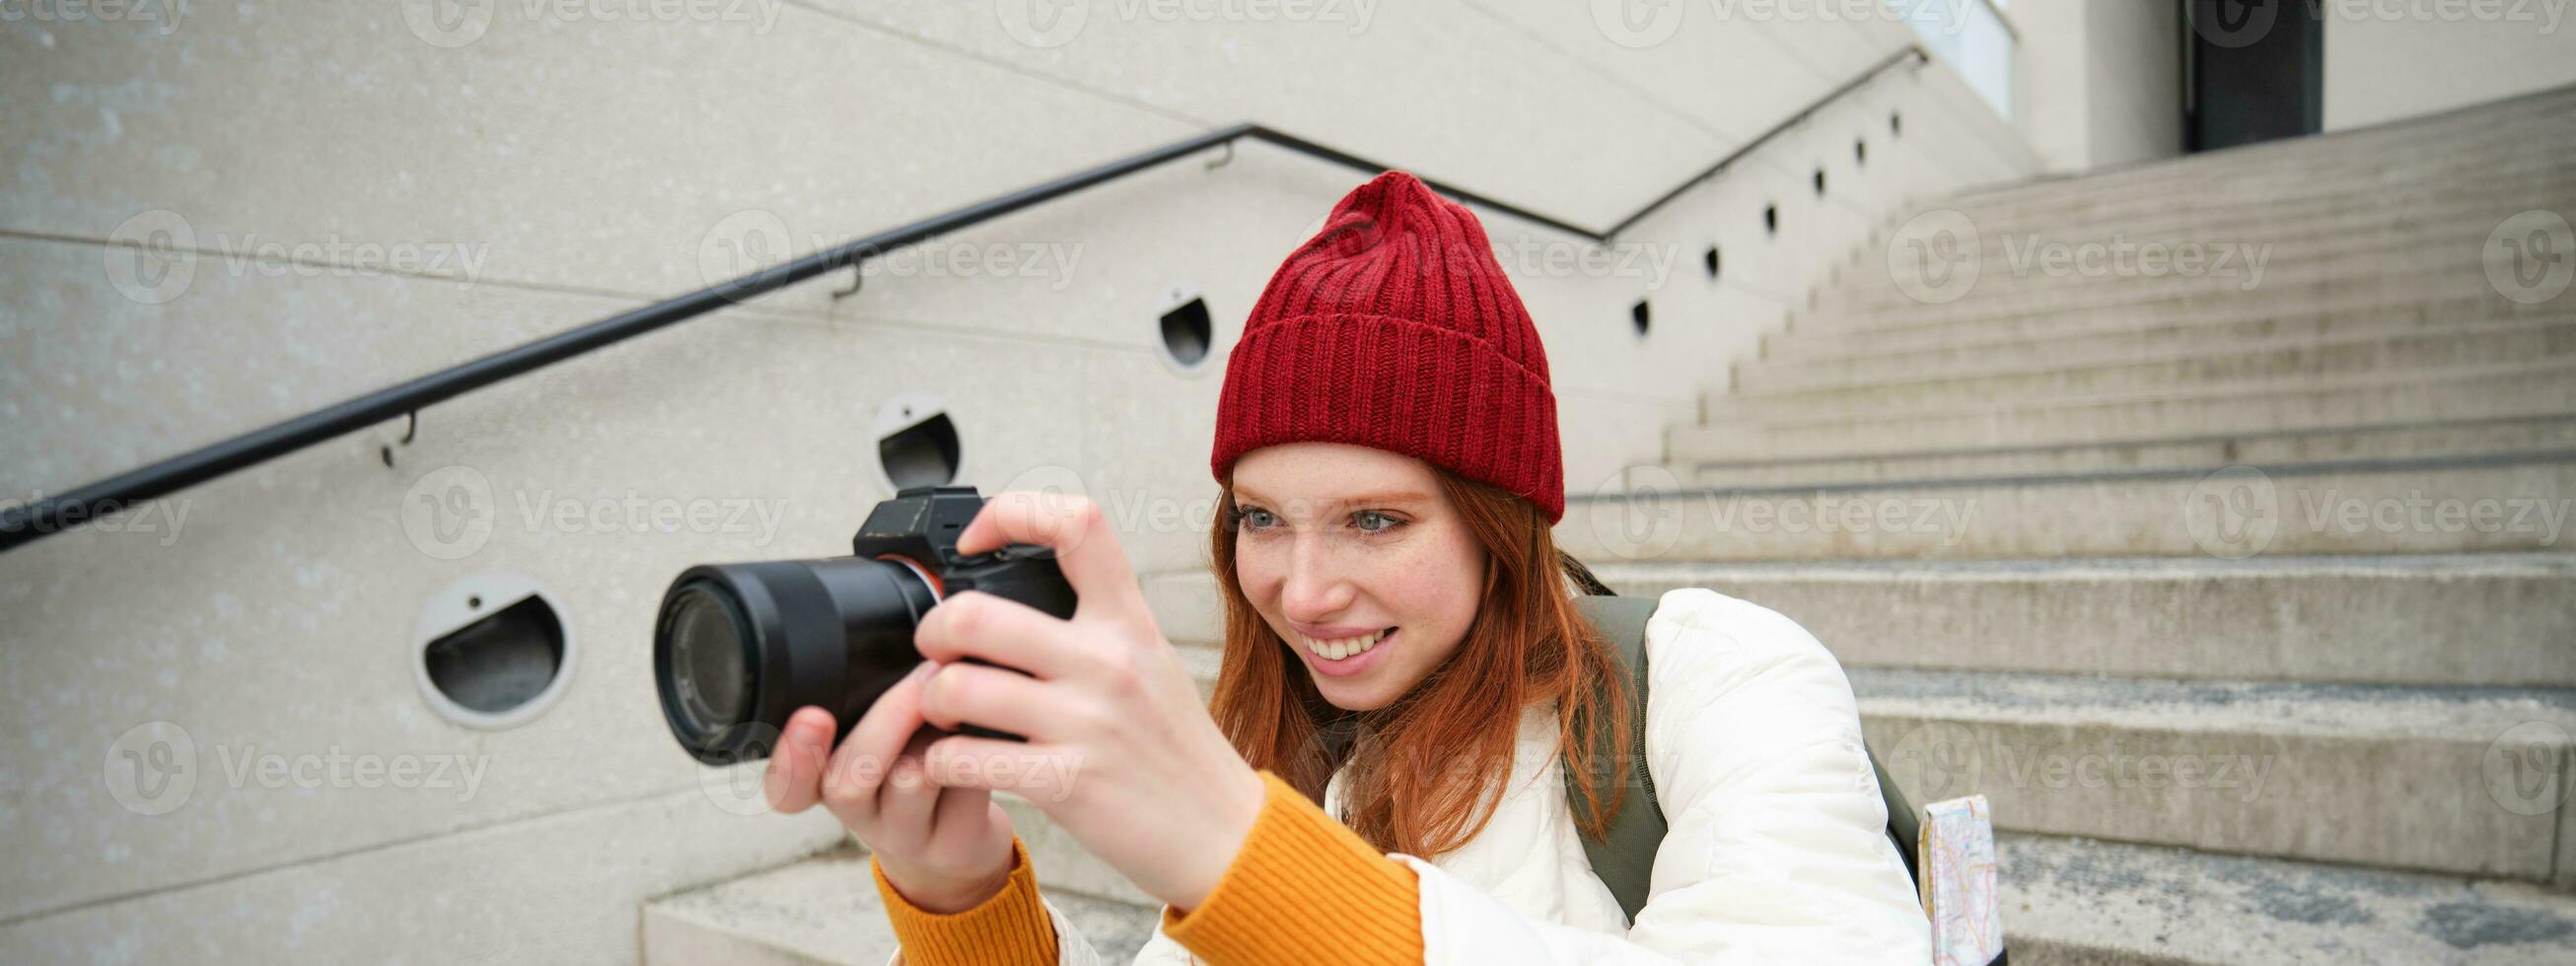 Urban people and lifestyle. Happy redhead woman takes photos, holding professional digital camera, photographing on streets photo